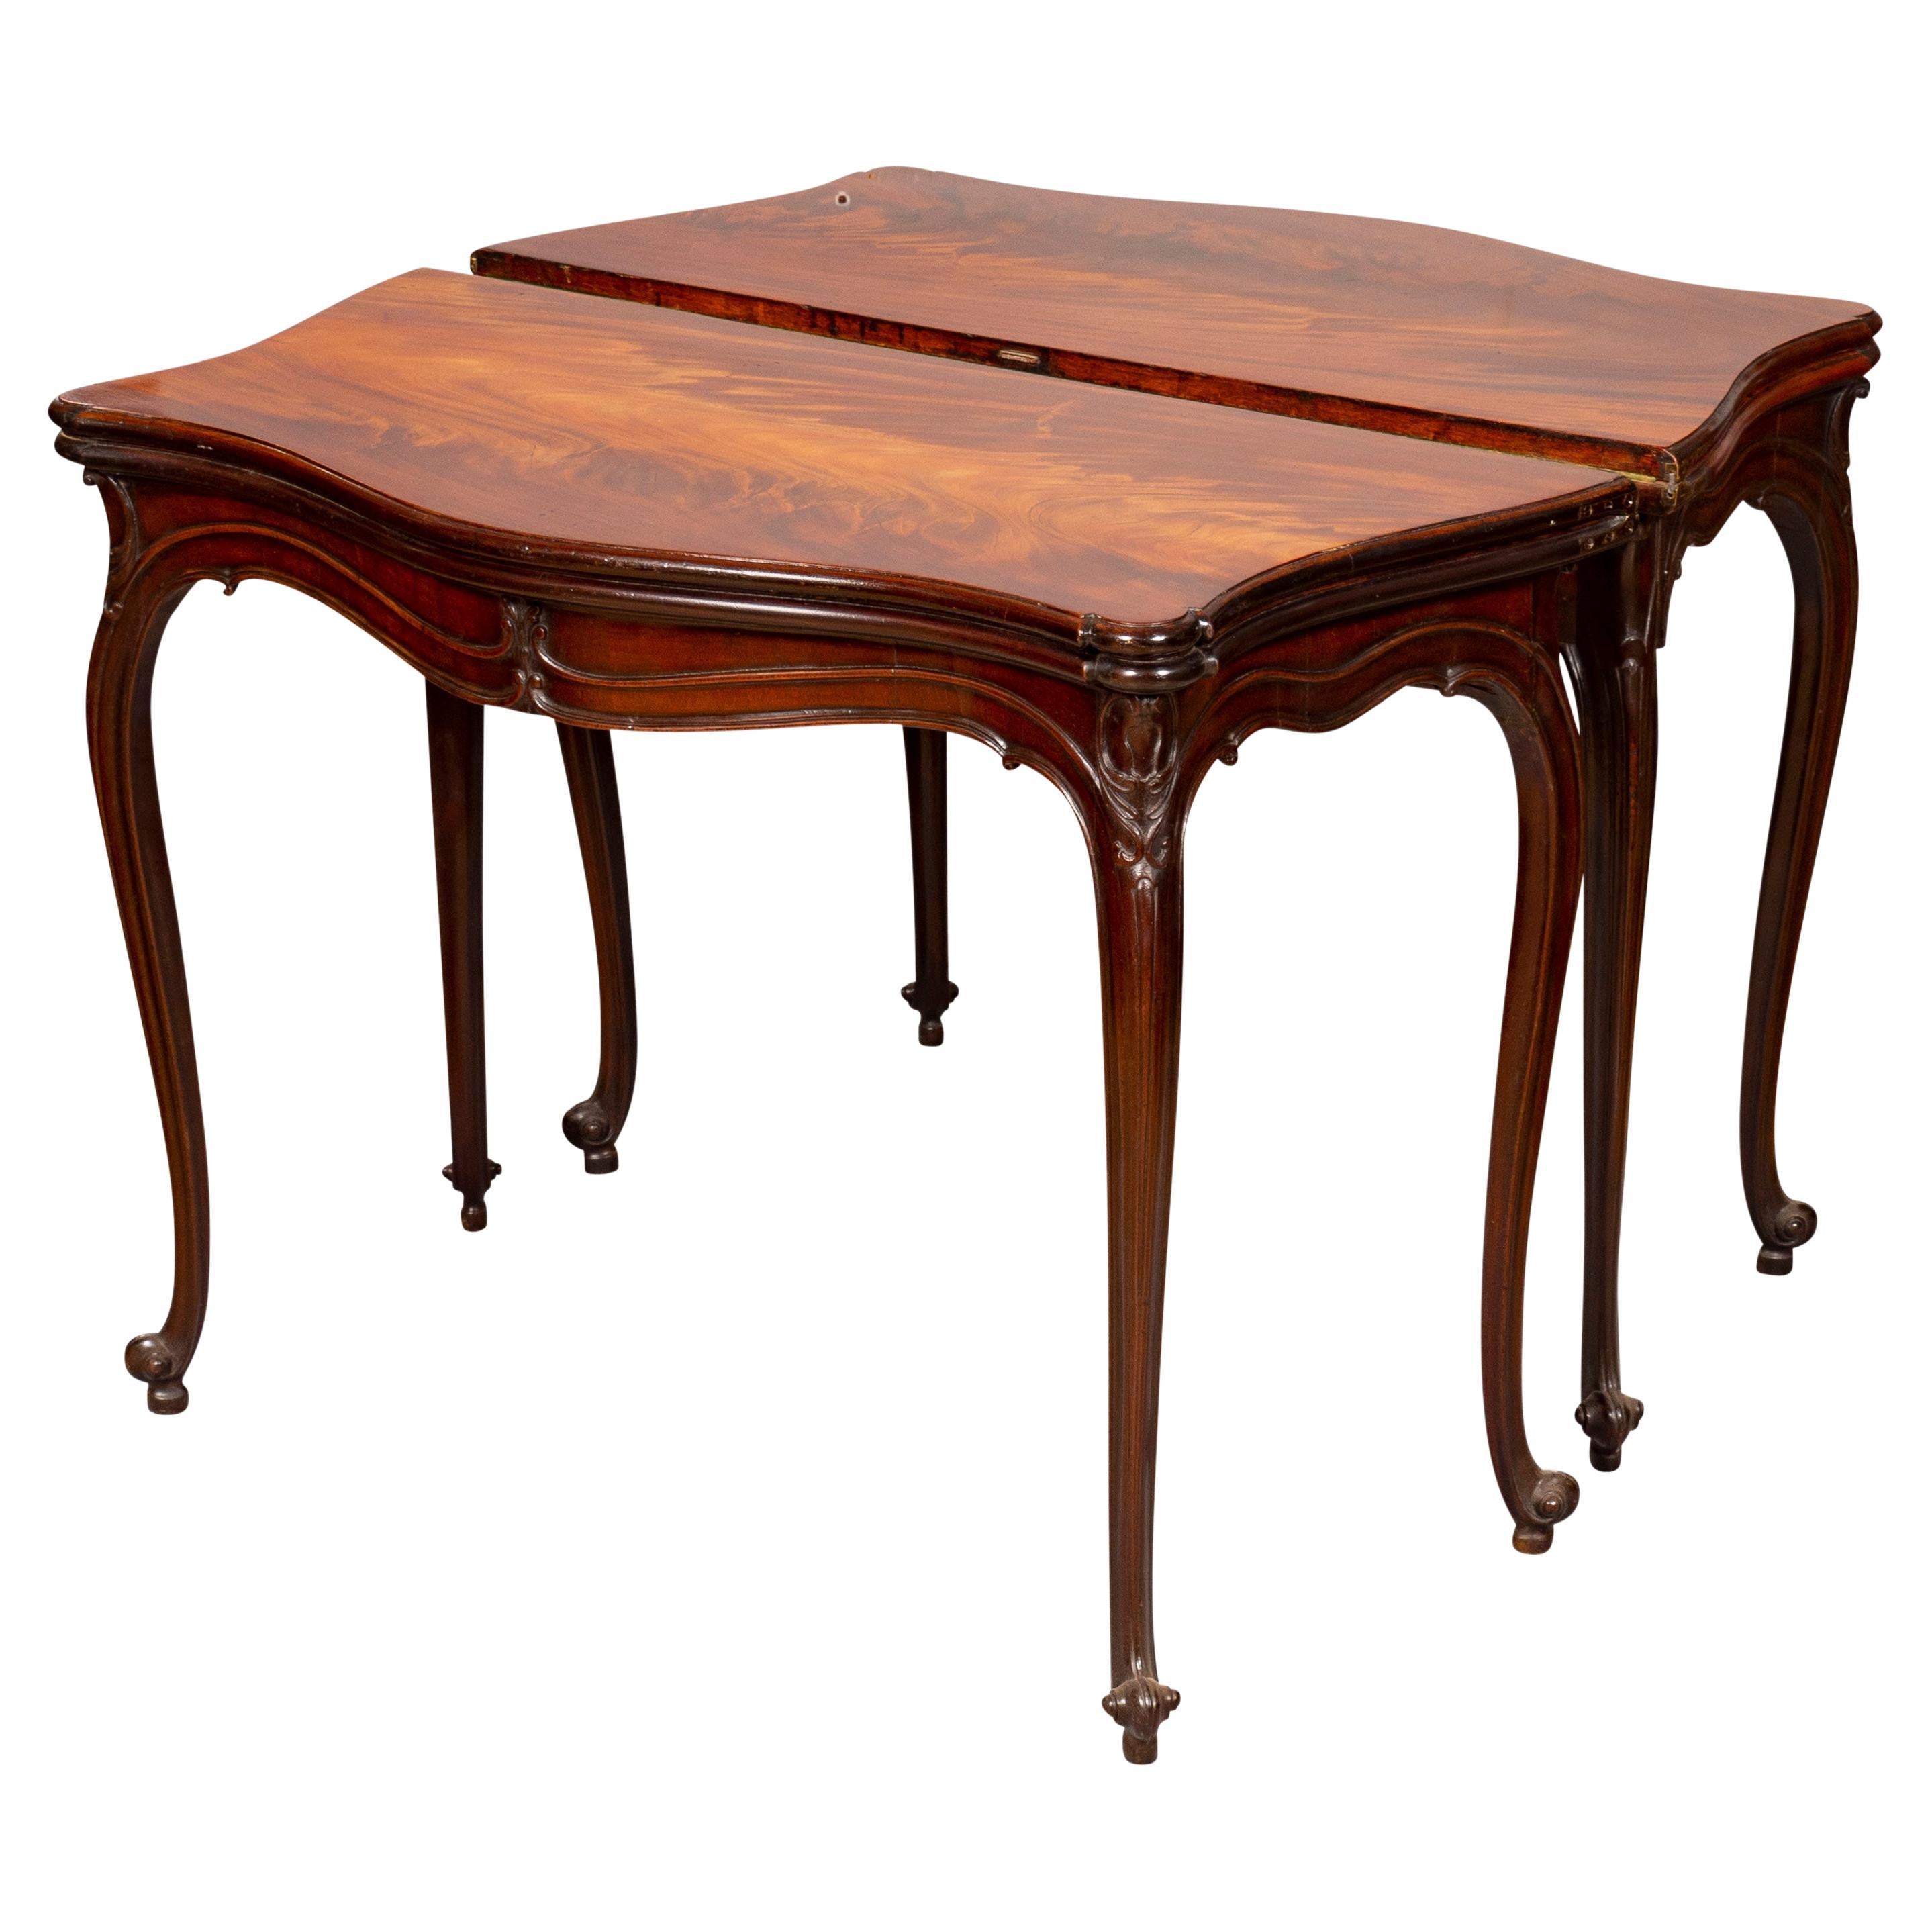 Lovely pair with serpentine hinged tops with wonderfully figured mahogany. Rounded moulded edge and shaped corners, green baize lined interior , conforming carved frieze, swing out leg and hidden drawer raised on cabriole legs in the French taste